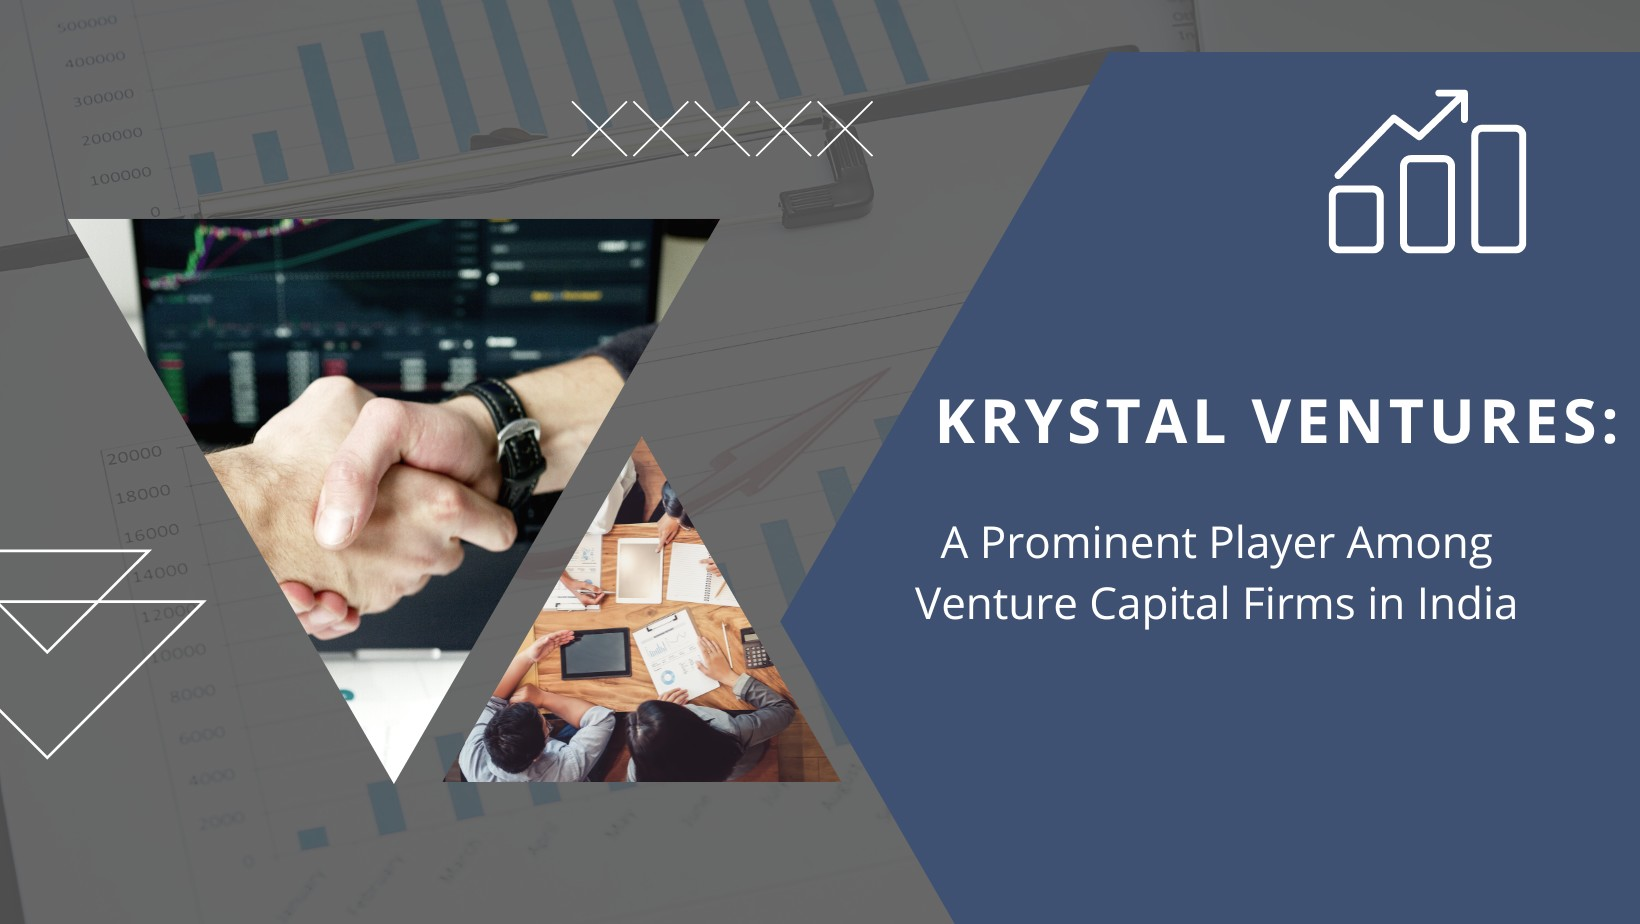 Krystal Ventures - A Prominent Player Among Venture Capital Firms in India